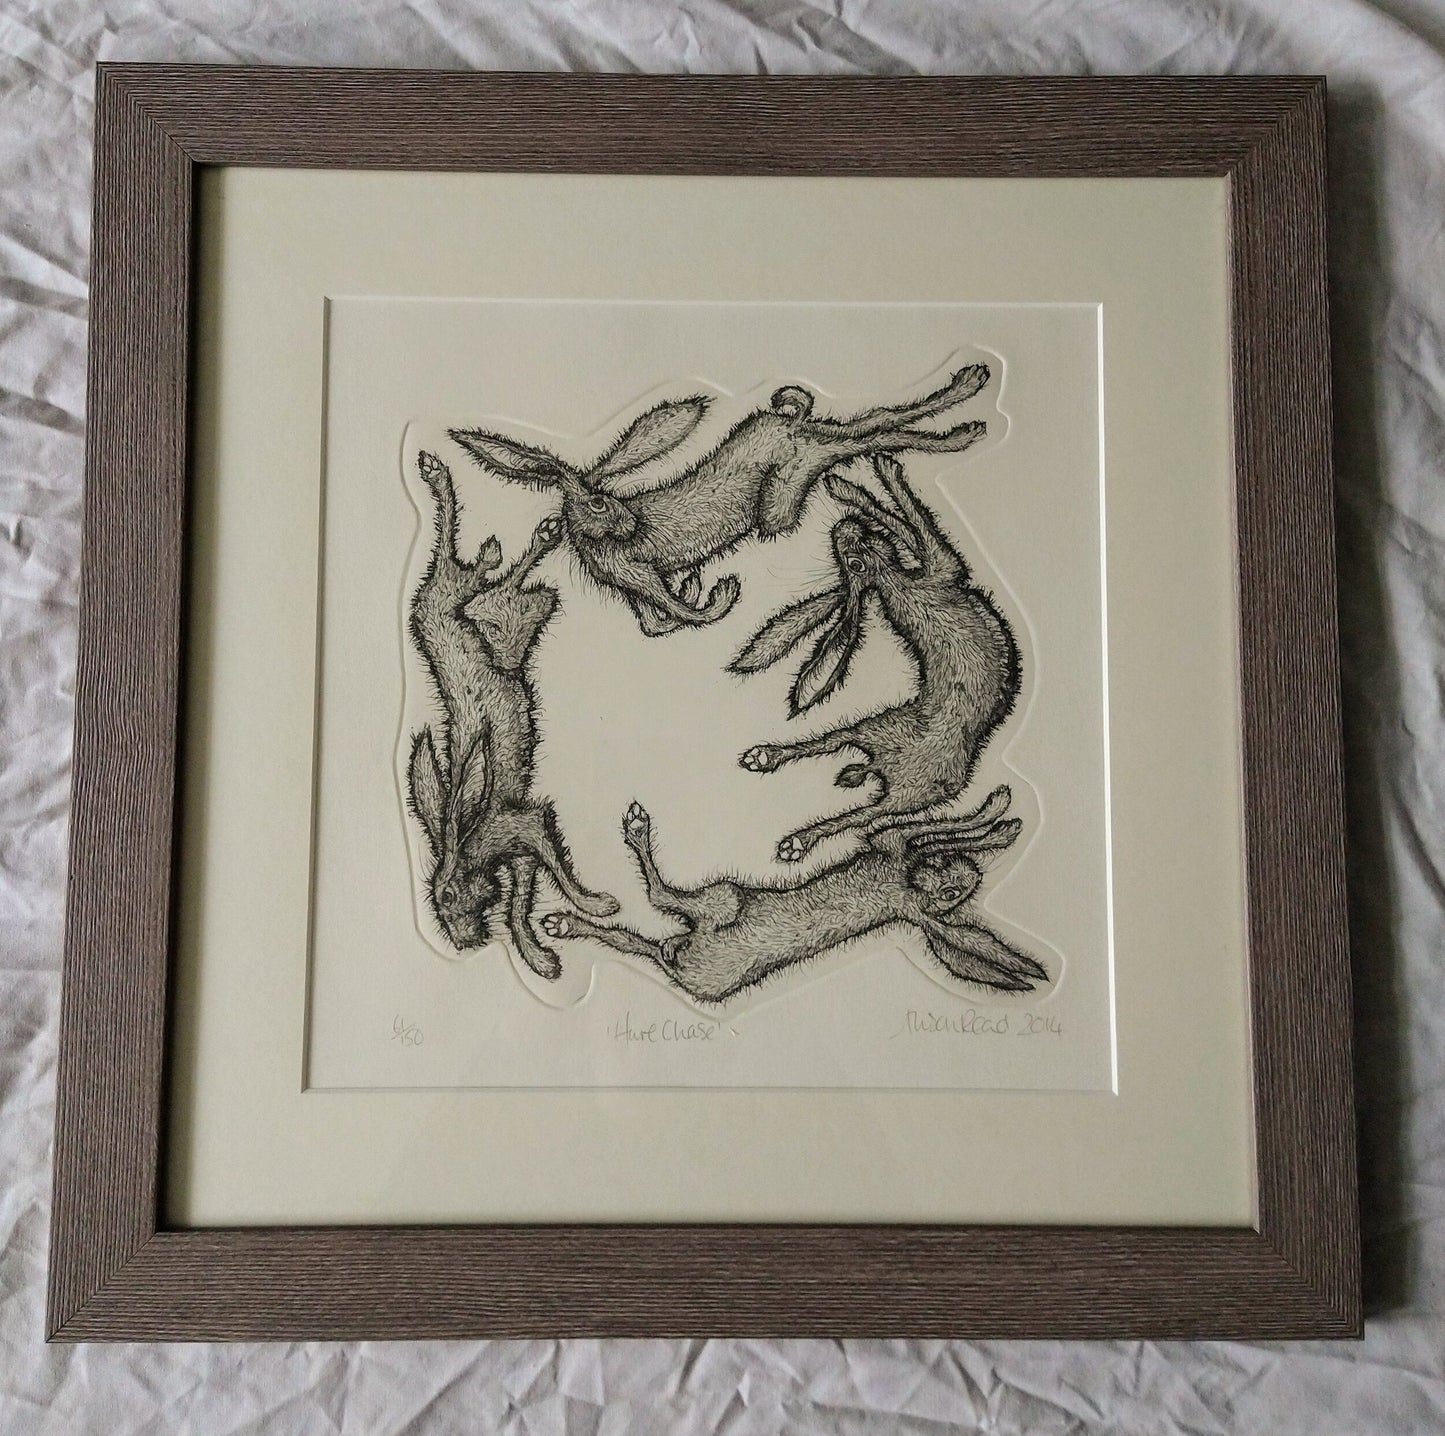 Alison Read - Original Etching of four hares playing- Hare Chase